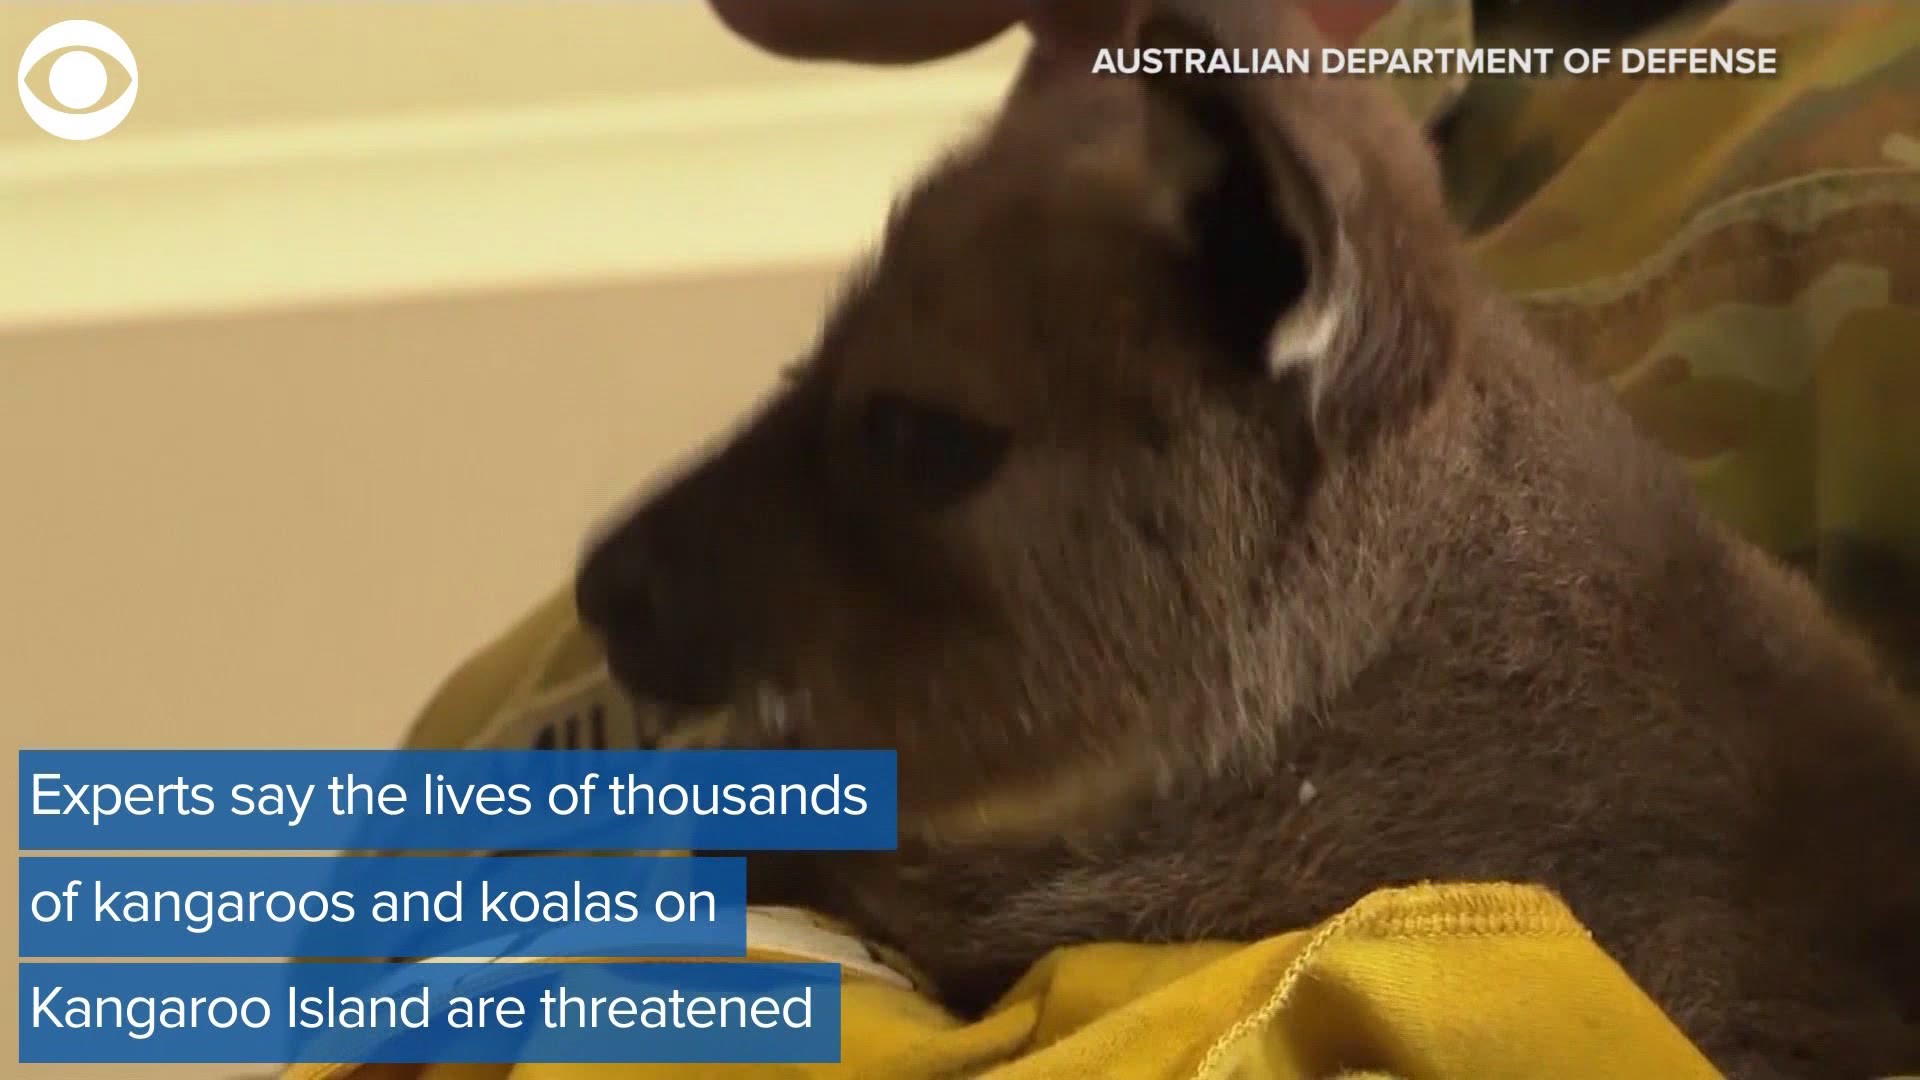 The wildfires in Australia have taken a toll on animals. Here's a look at those who are helping the animals on Kangaroo Island.